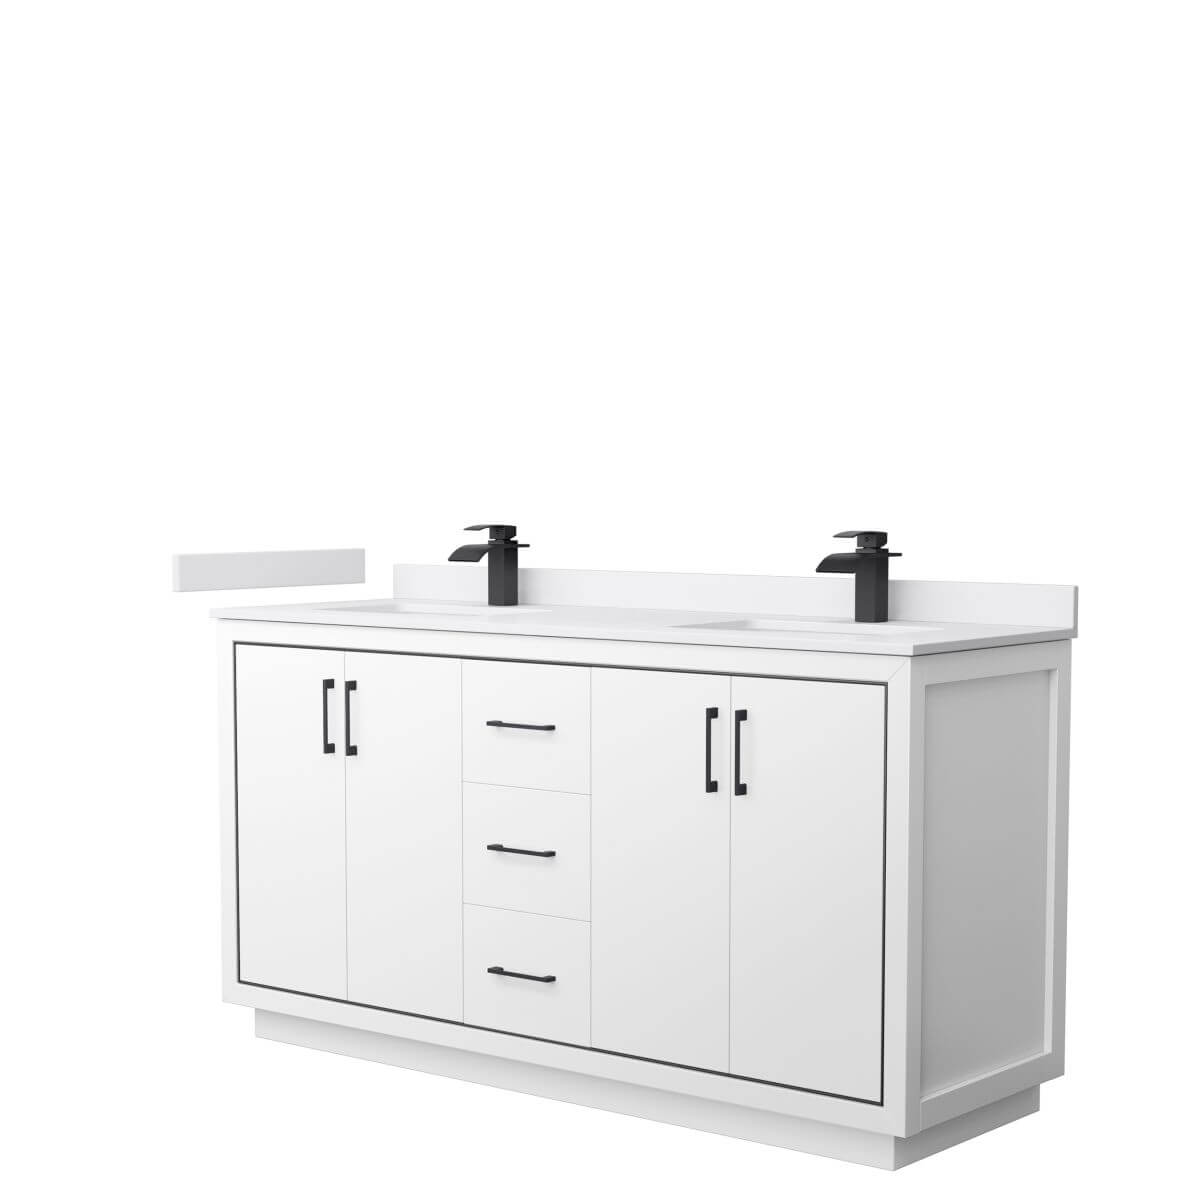 Wyndham Collection WCF111166DWBWCUNSMXX Icon 66 inch Double Bathroom Vanity in White with White Cultured Marble Countertop, Undermount Square Sinks and Matte Black Trim